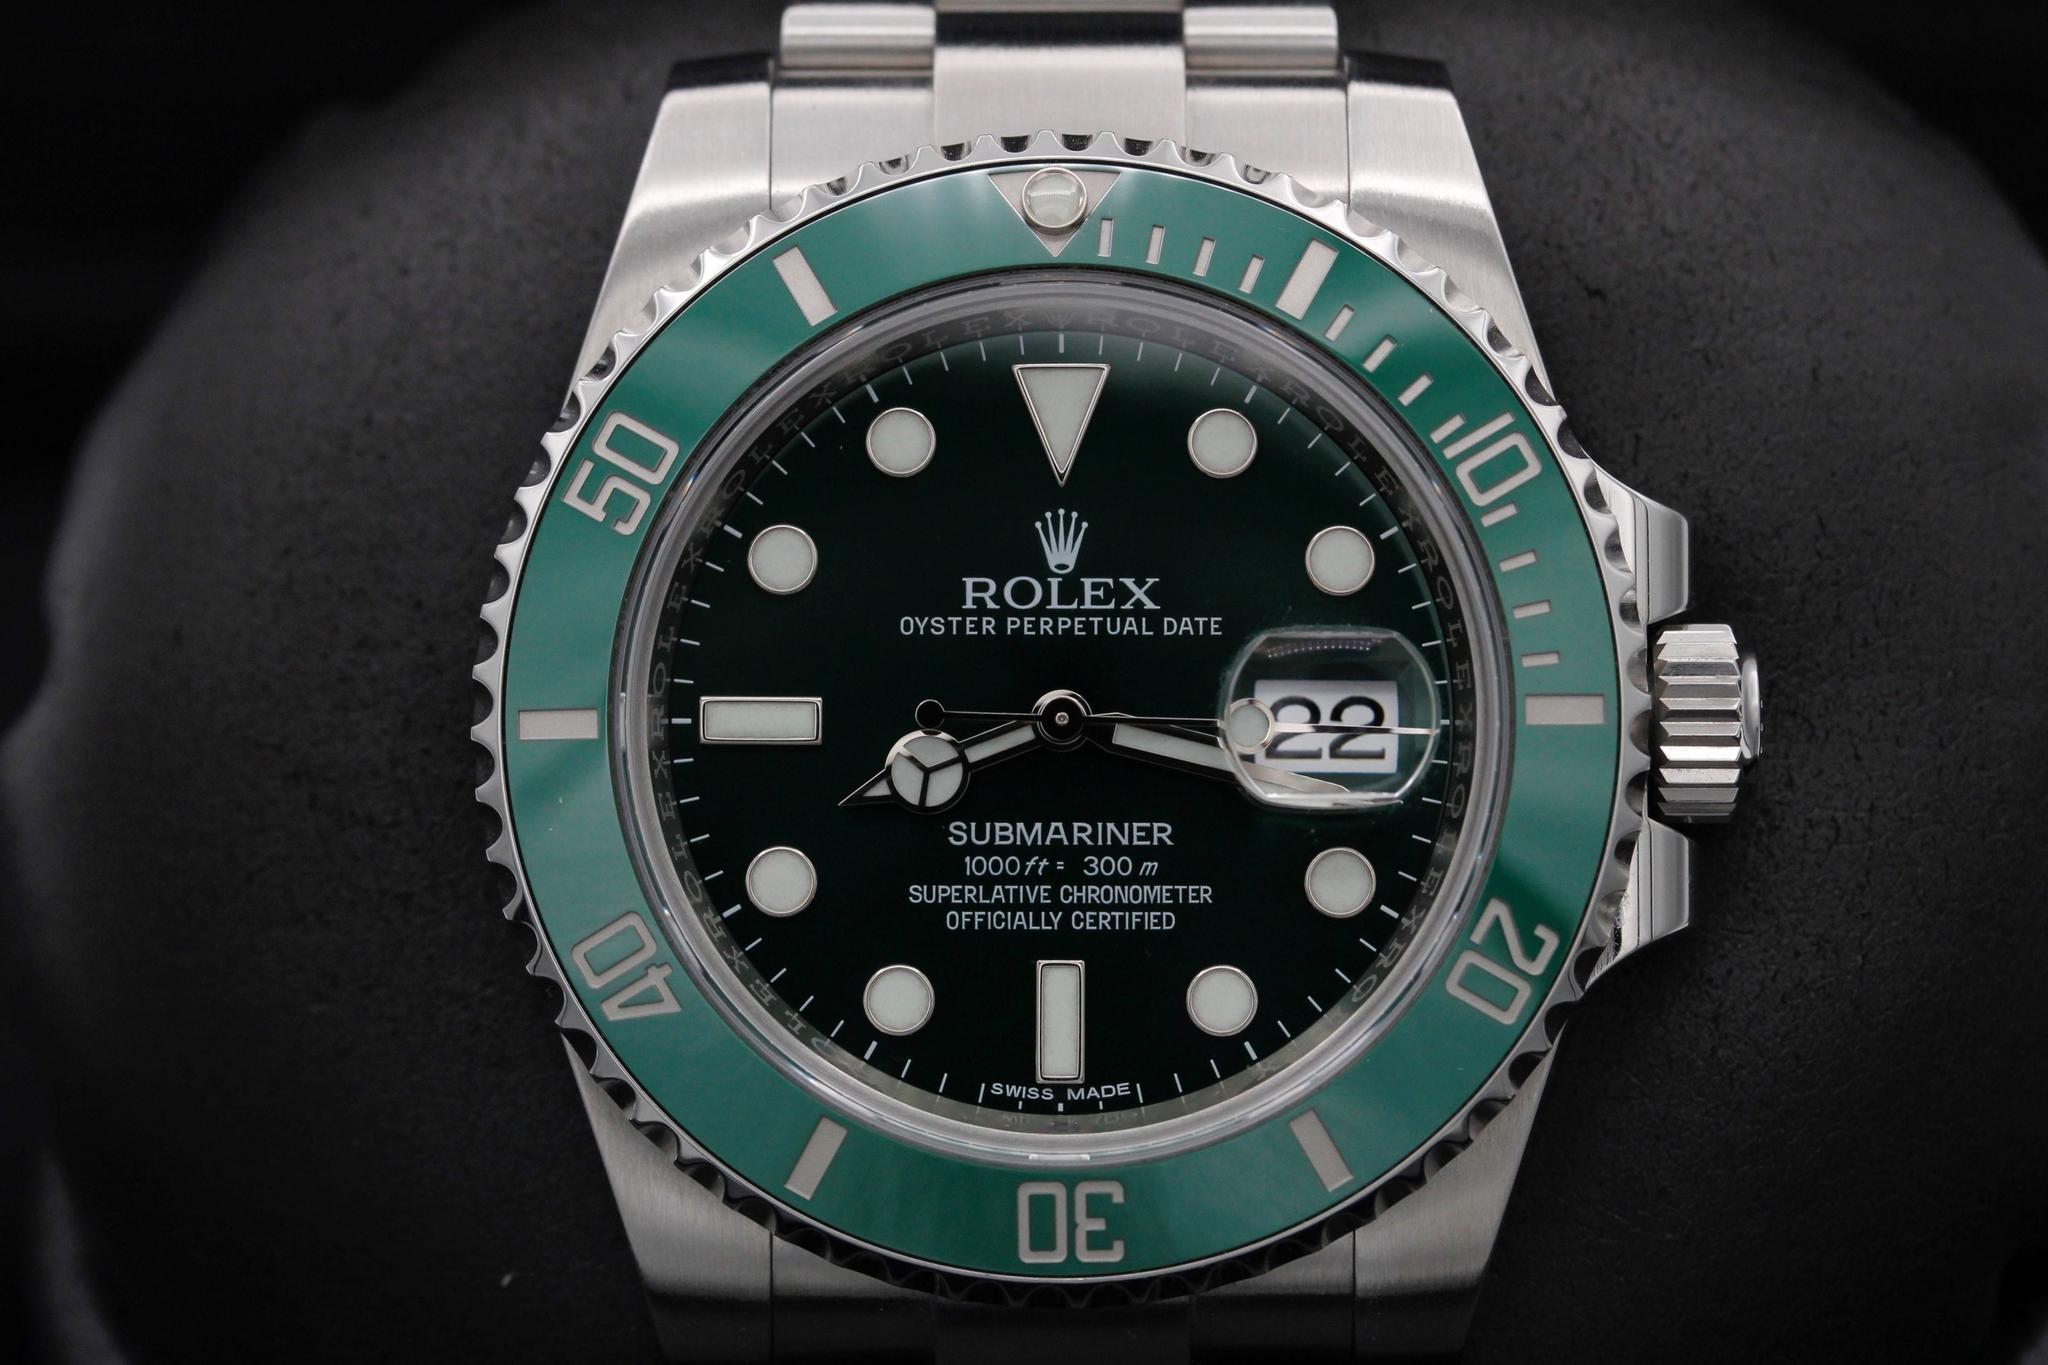 Rolex Submariner HULK 116610LV Pre Owned in Very Good Condition